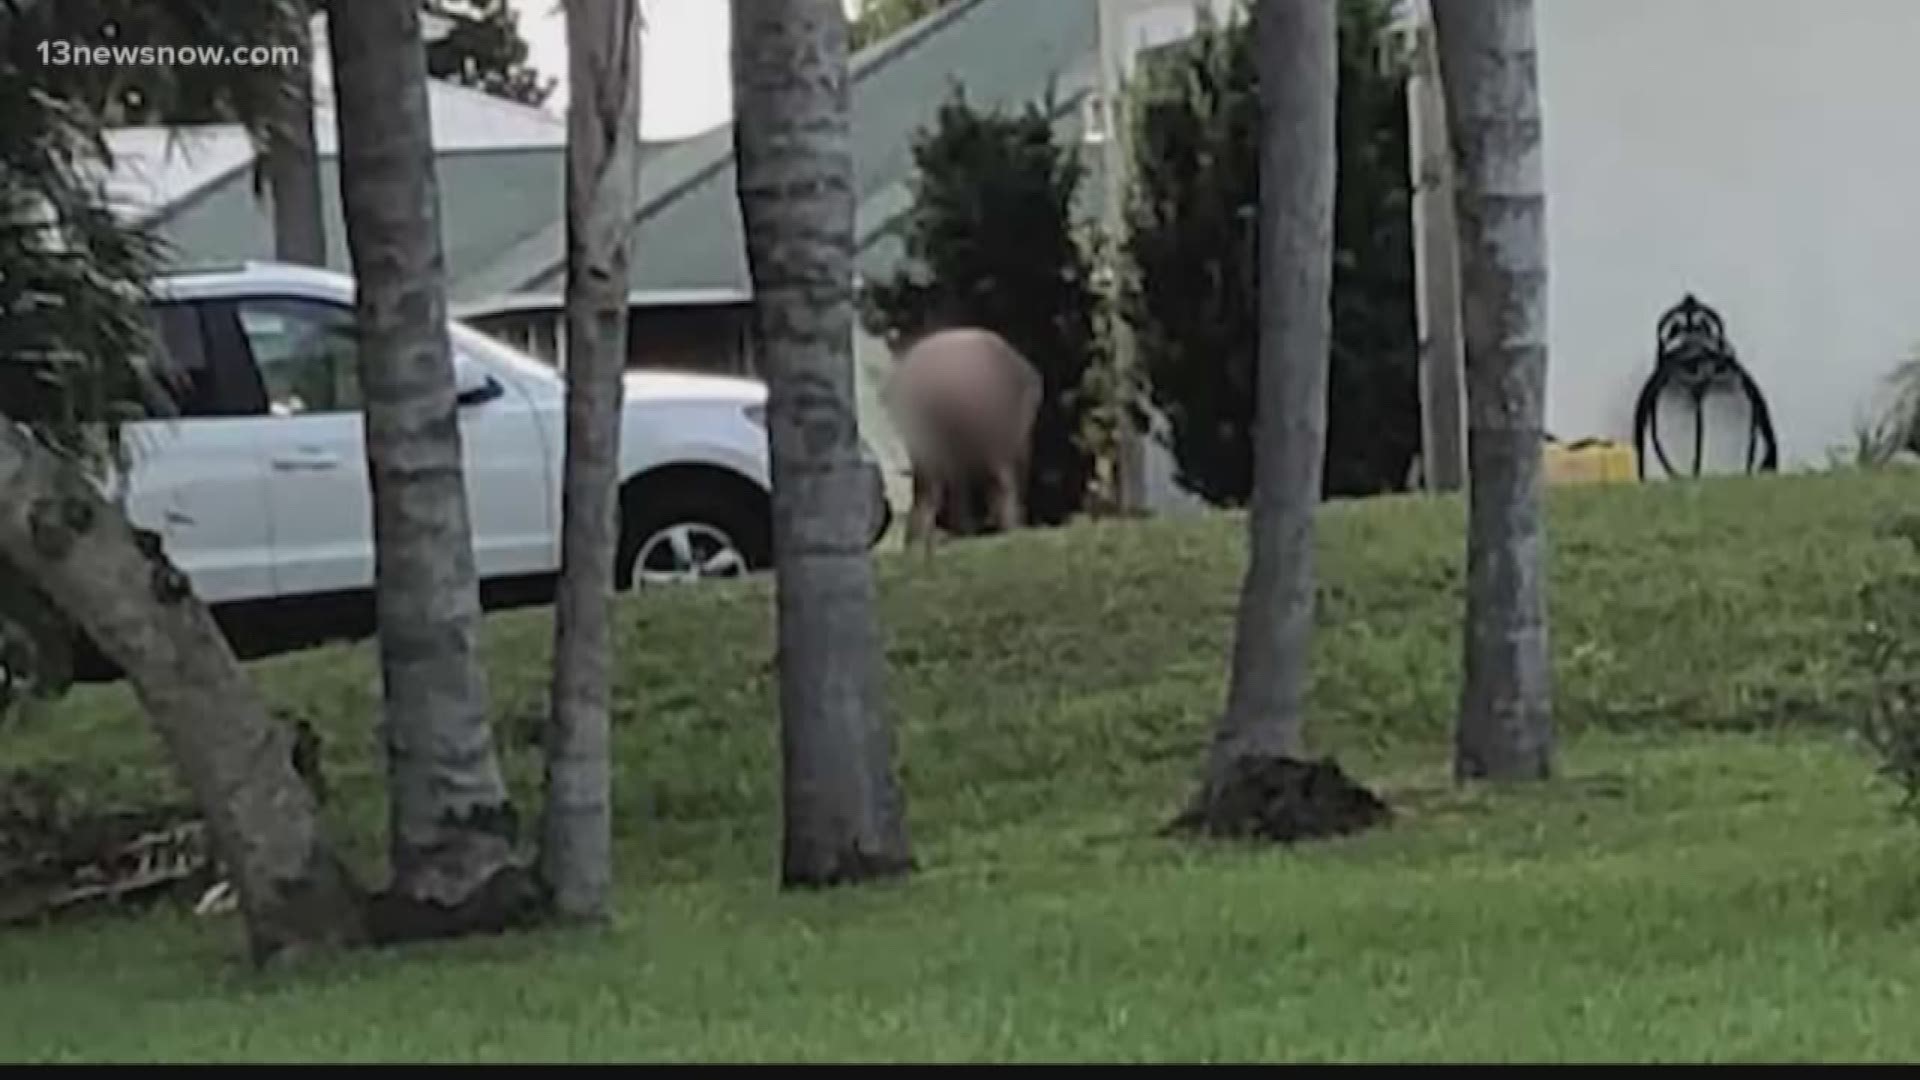 A community is upset in Florida because one neighbor is doing yardwork in the buff.